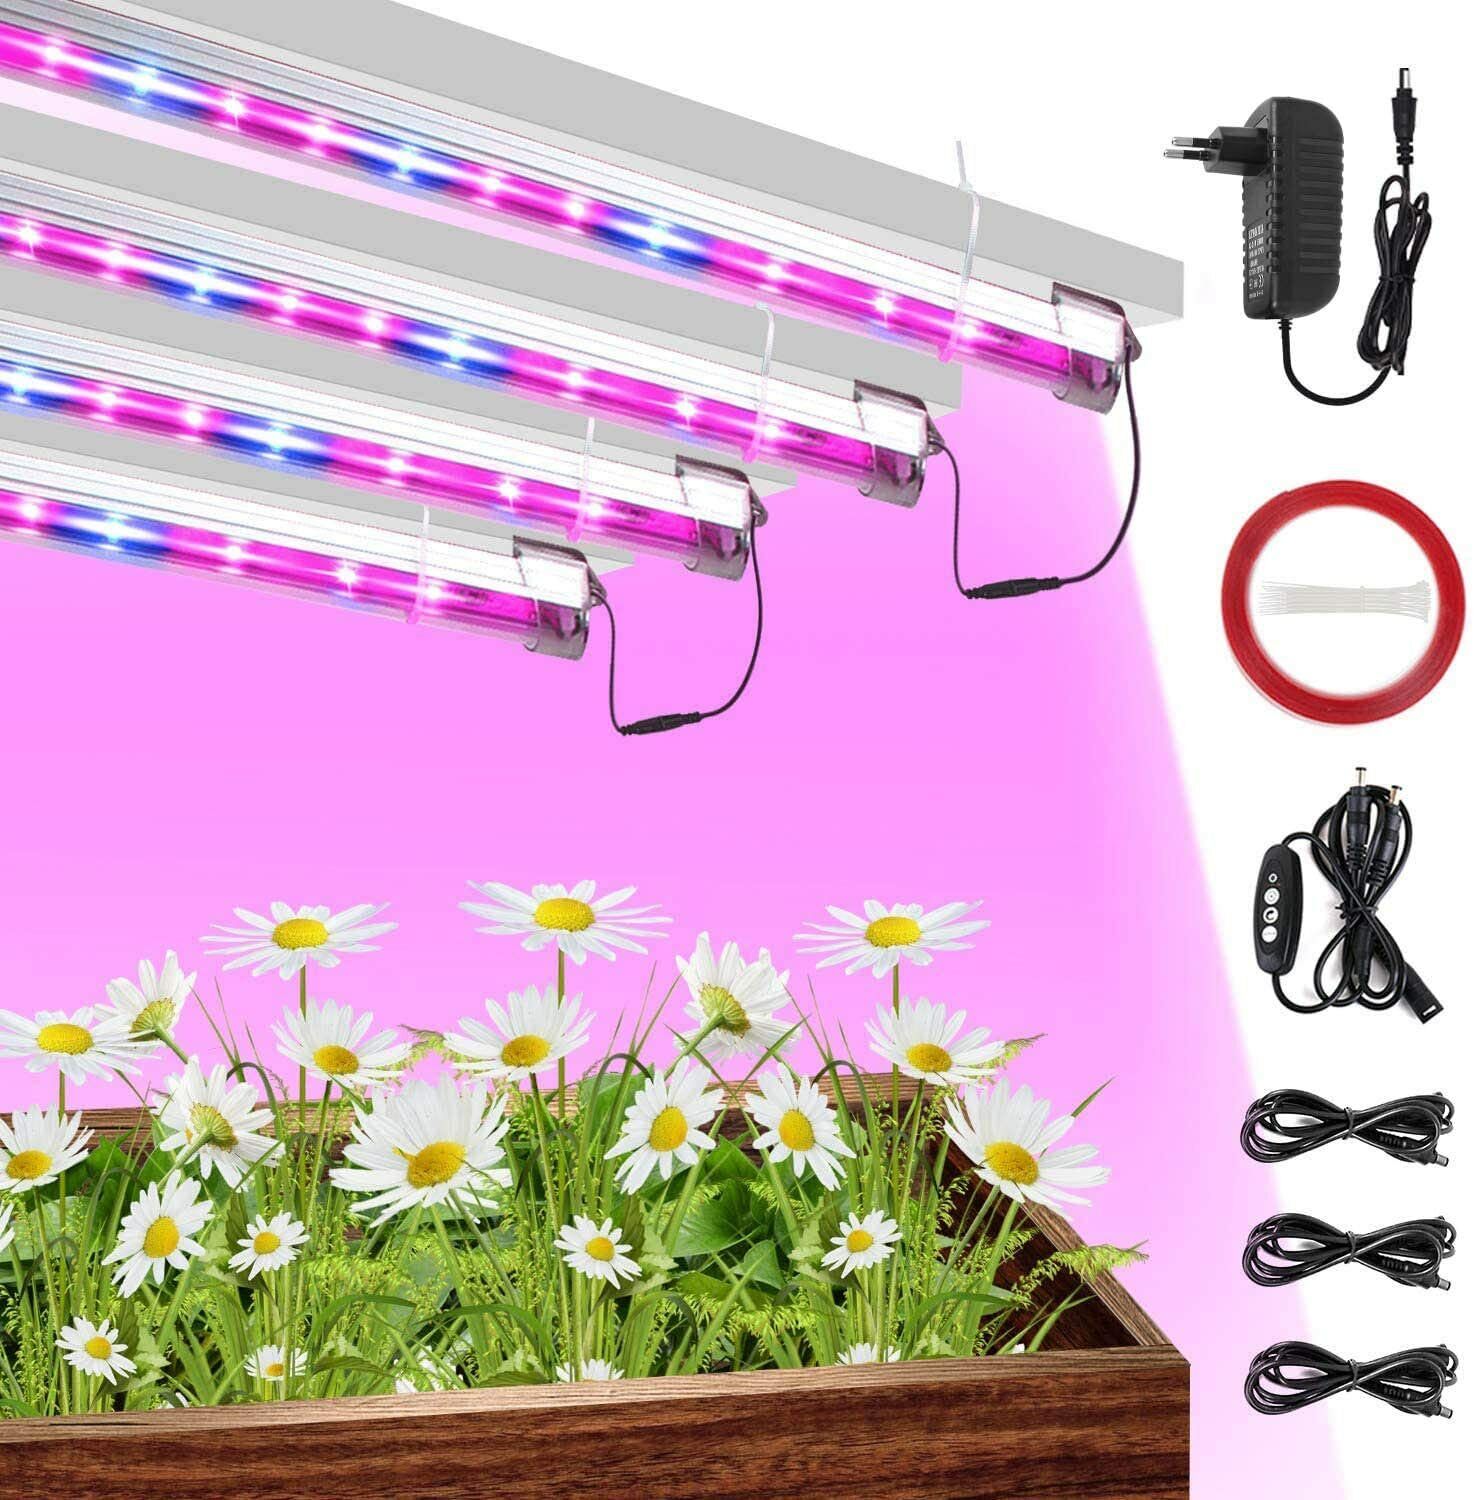 4 Pack LED Grow Light Plant Growing Lamp Lights for Indoor Plants Hydroponics